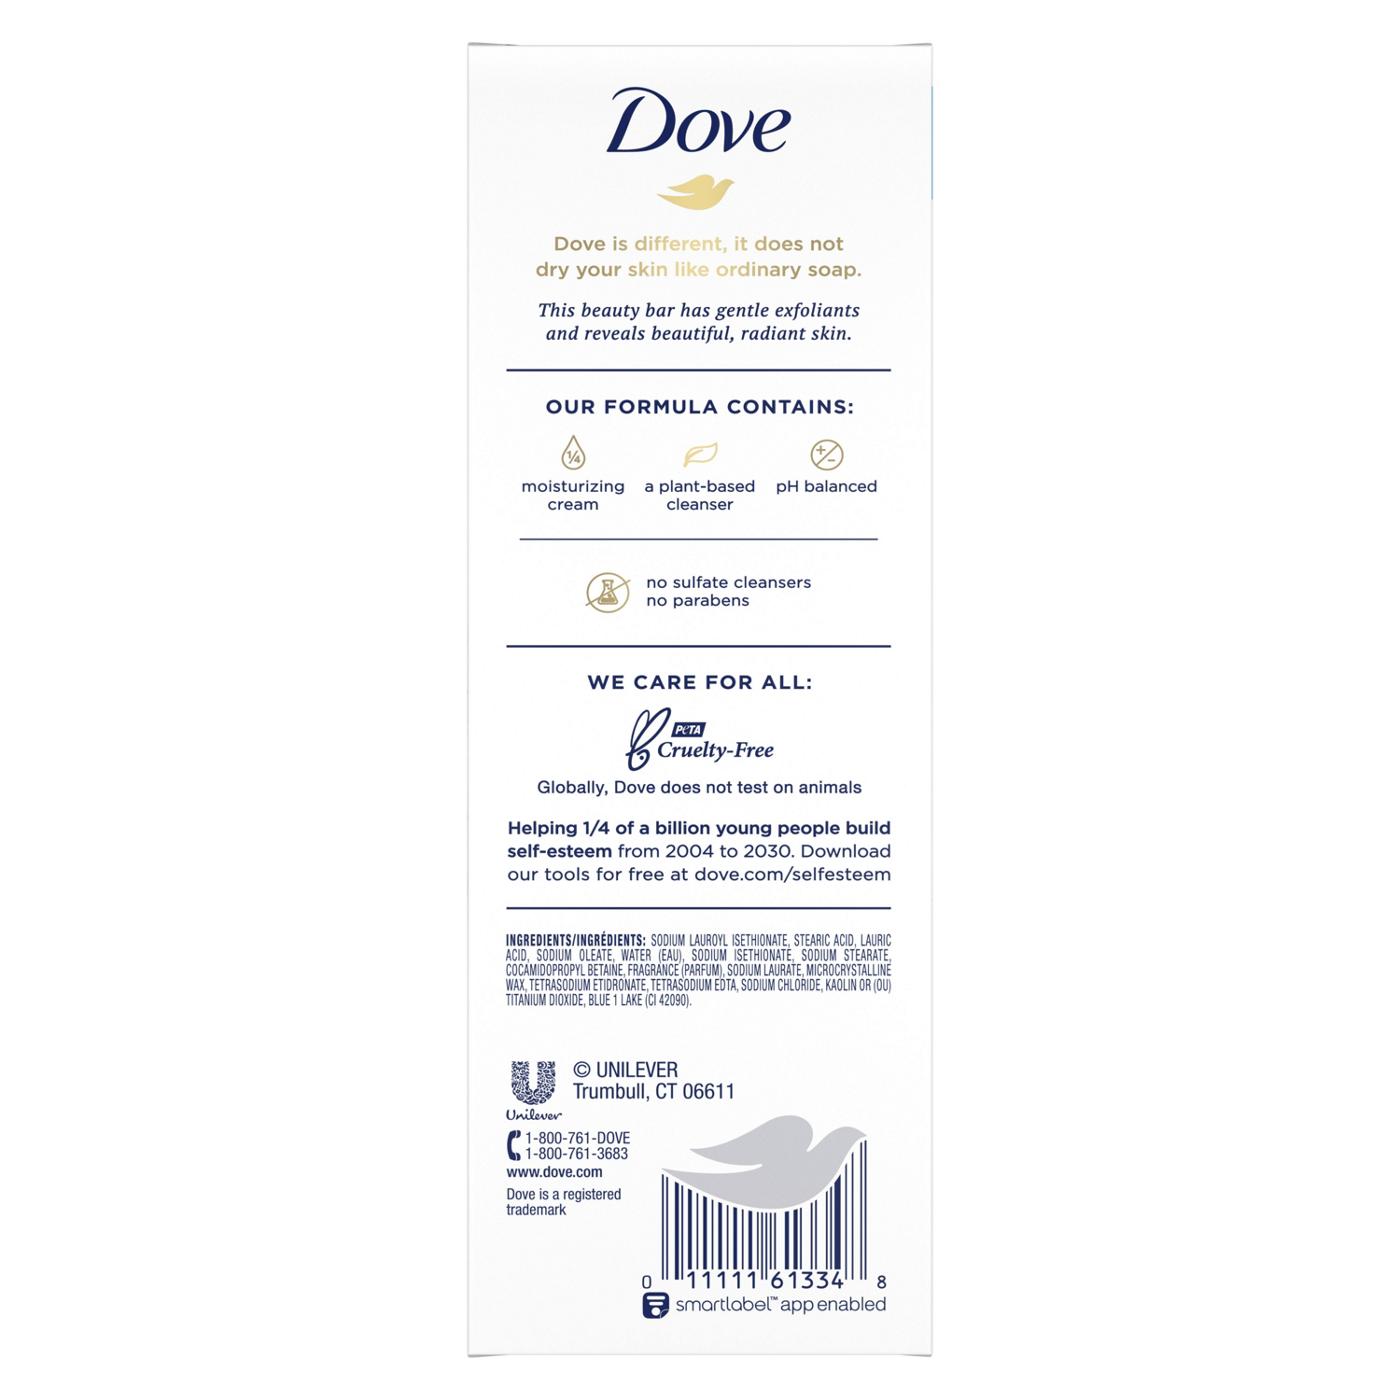 Dove Beauty Bar Gentle Exfoliating With Mild Cleanser; image 7 of 8